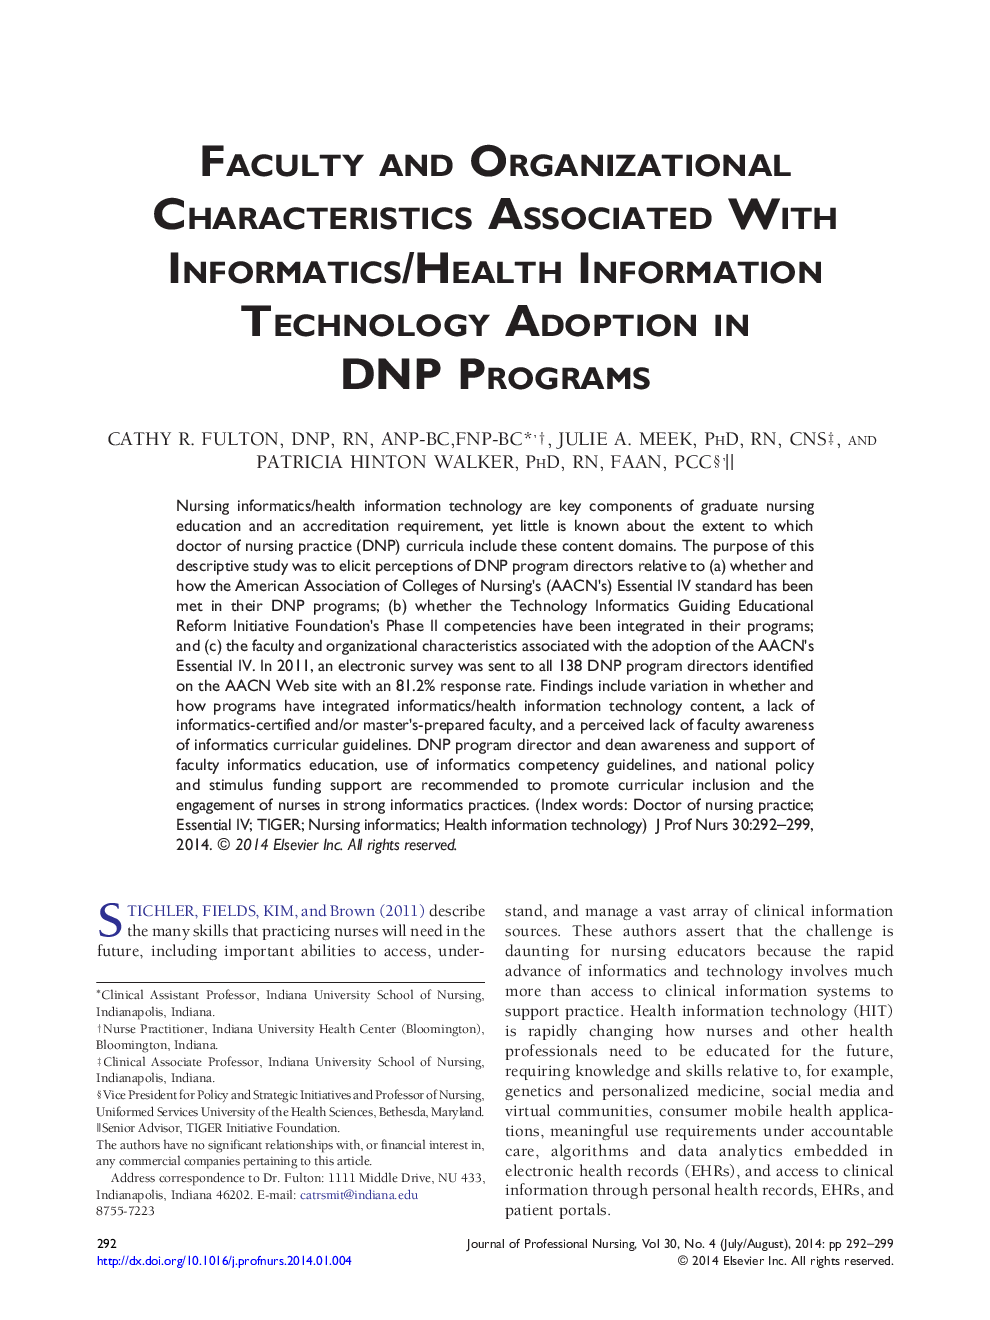 Faculty and Organizational Characteristics Associated With Informatics/Health Information Technology Adoption in DNP Programs 